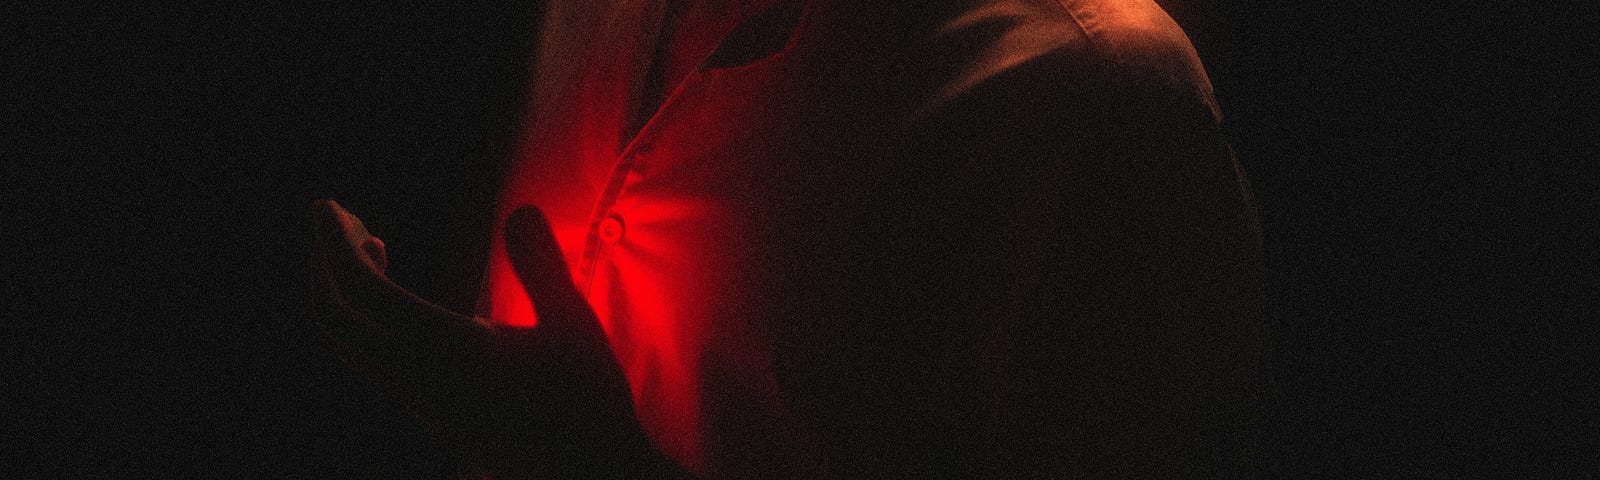 A red glow against a person’s chest, tehir hand held close to their chest